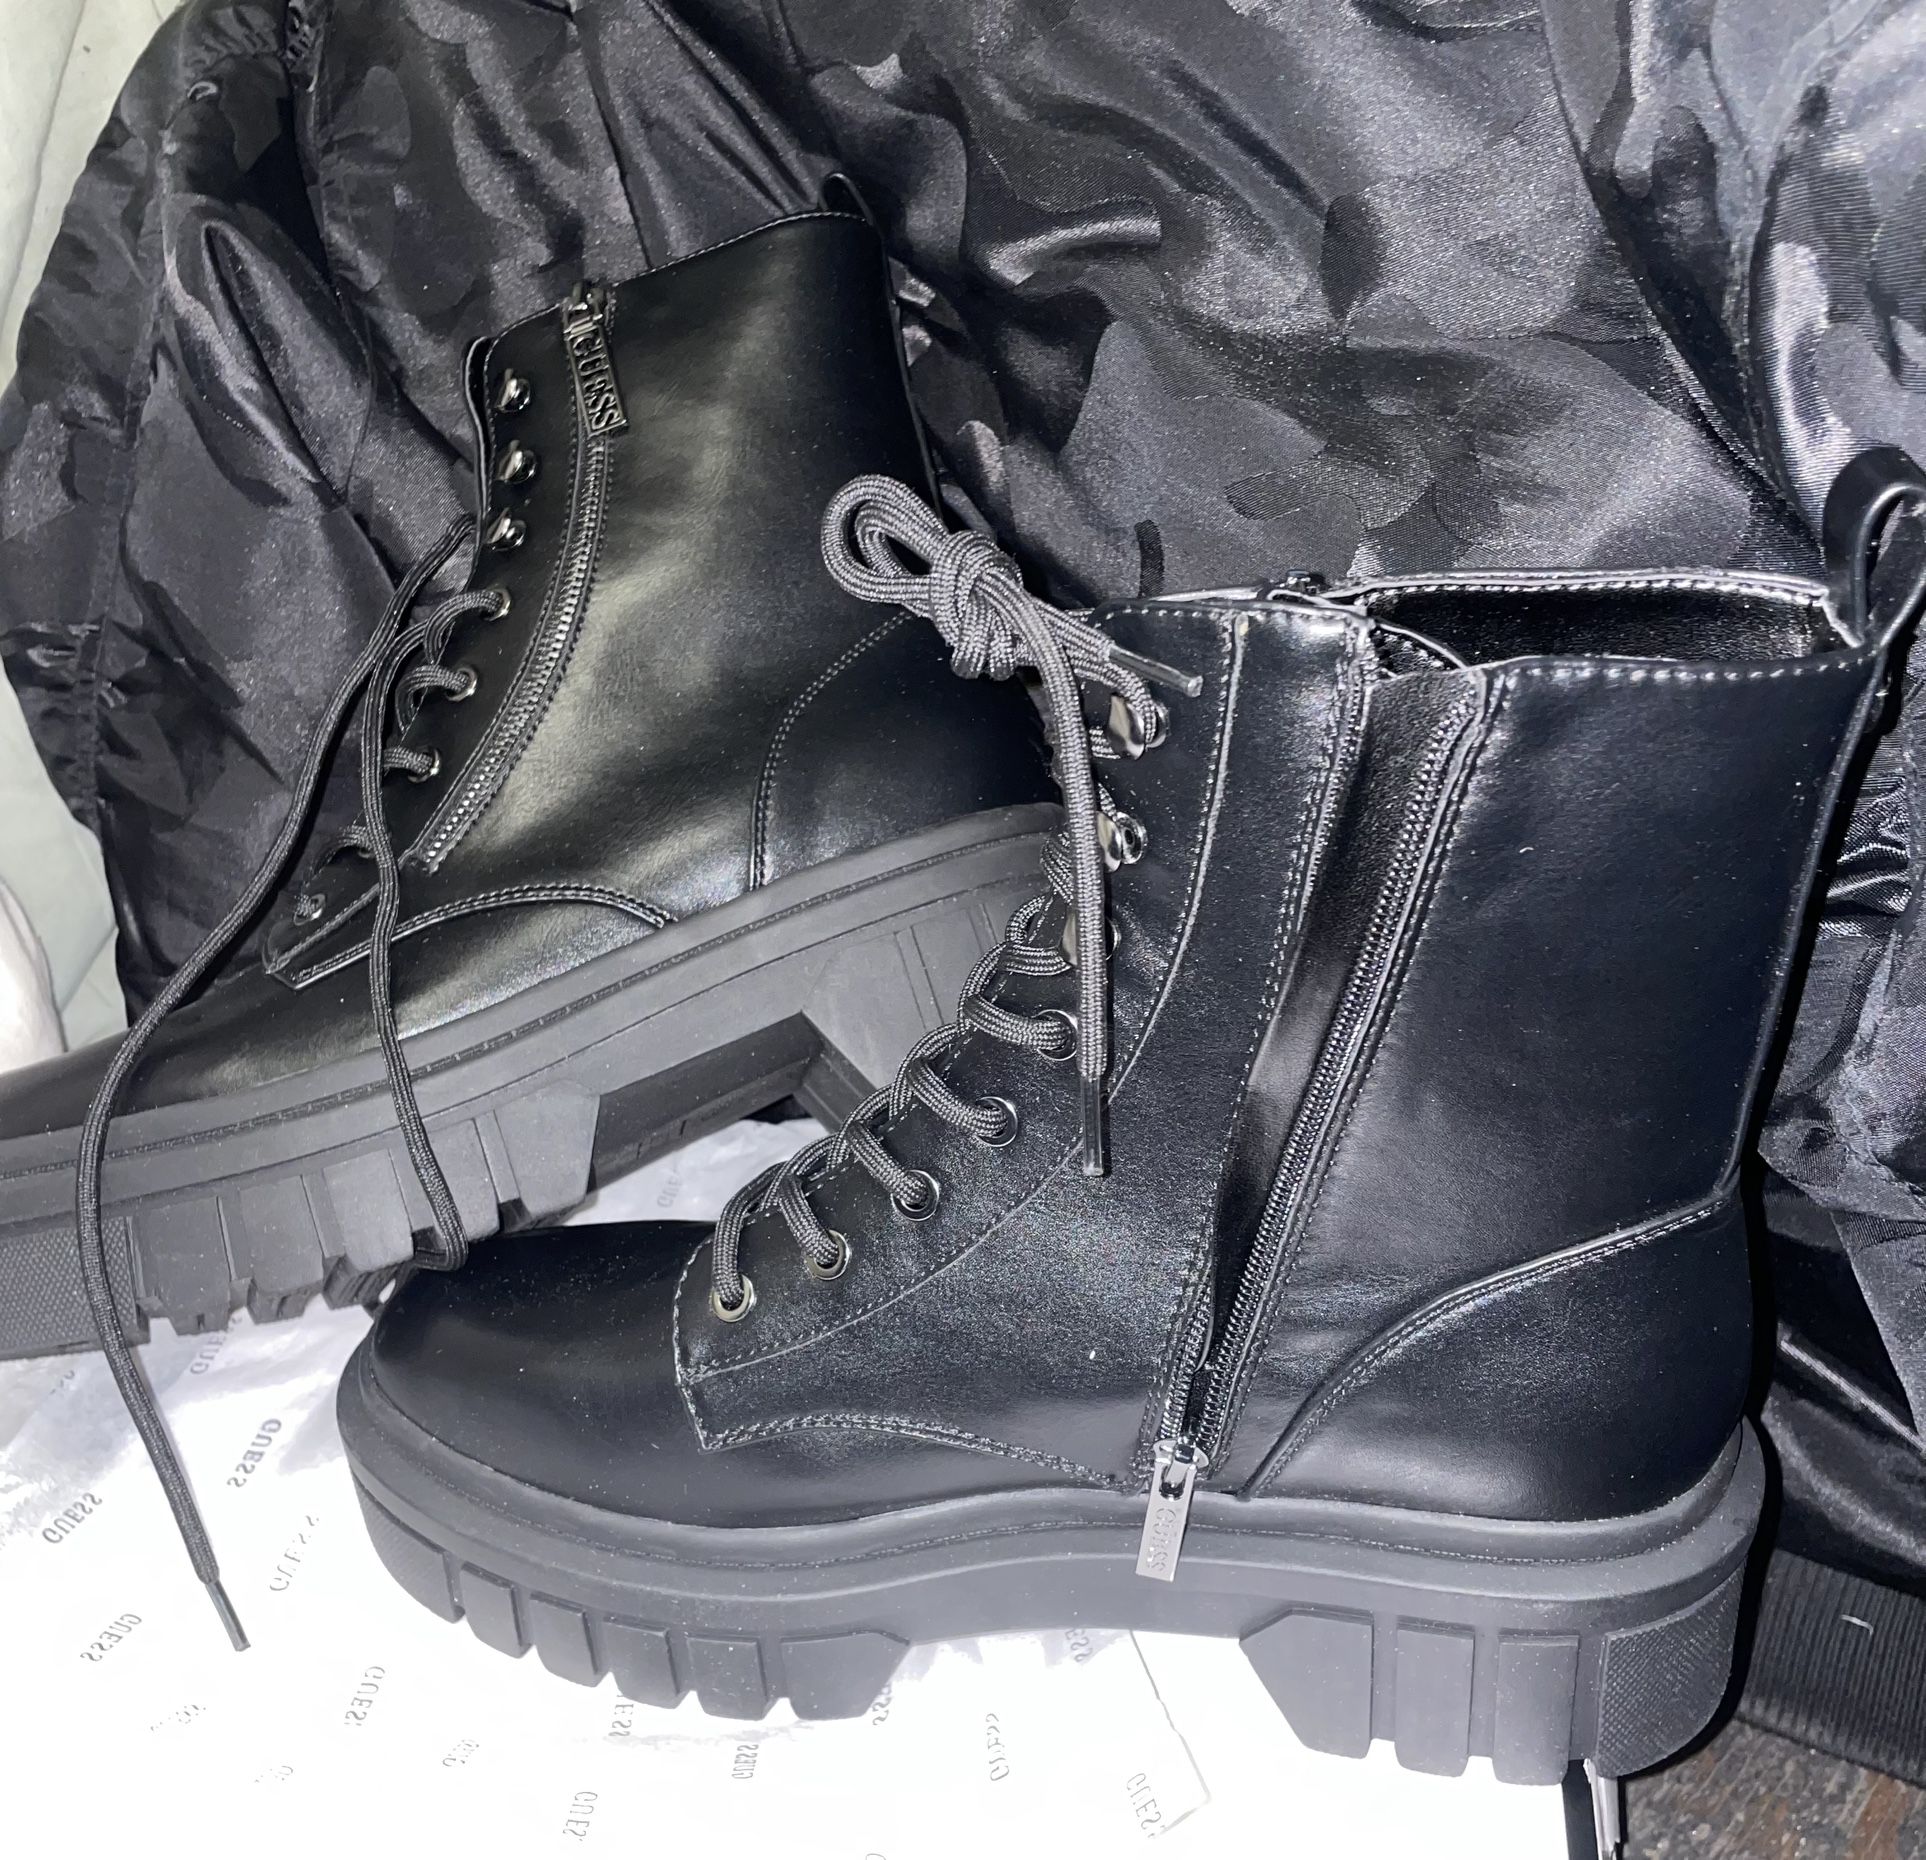 Guess Combat Boots Size 11